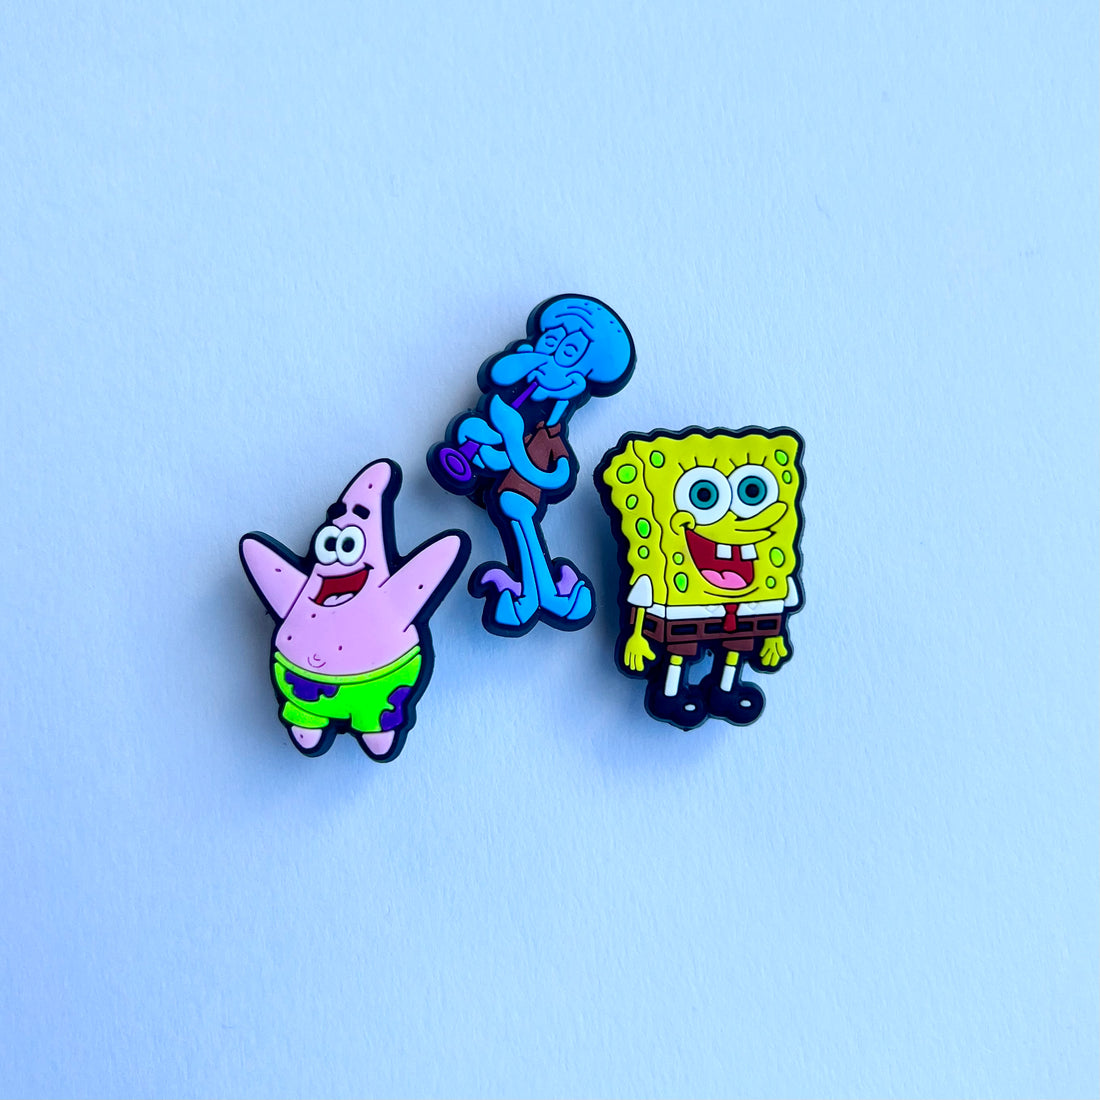 The Spongebob Charms Pack